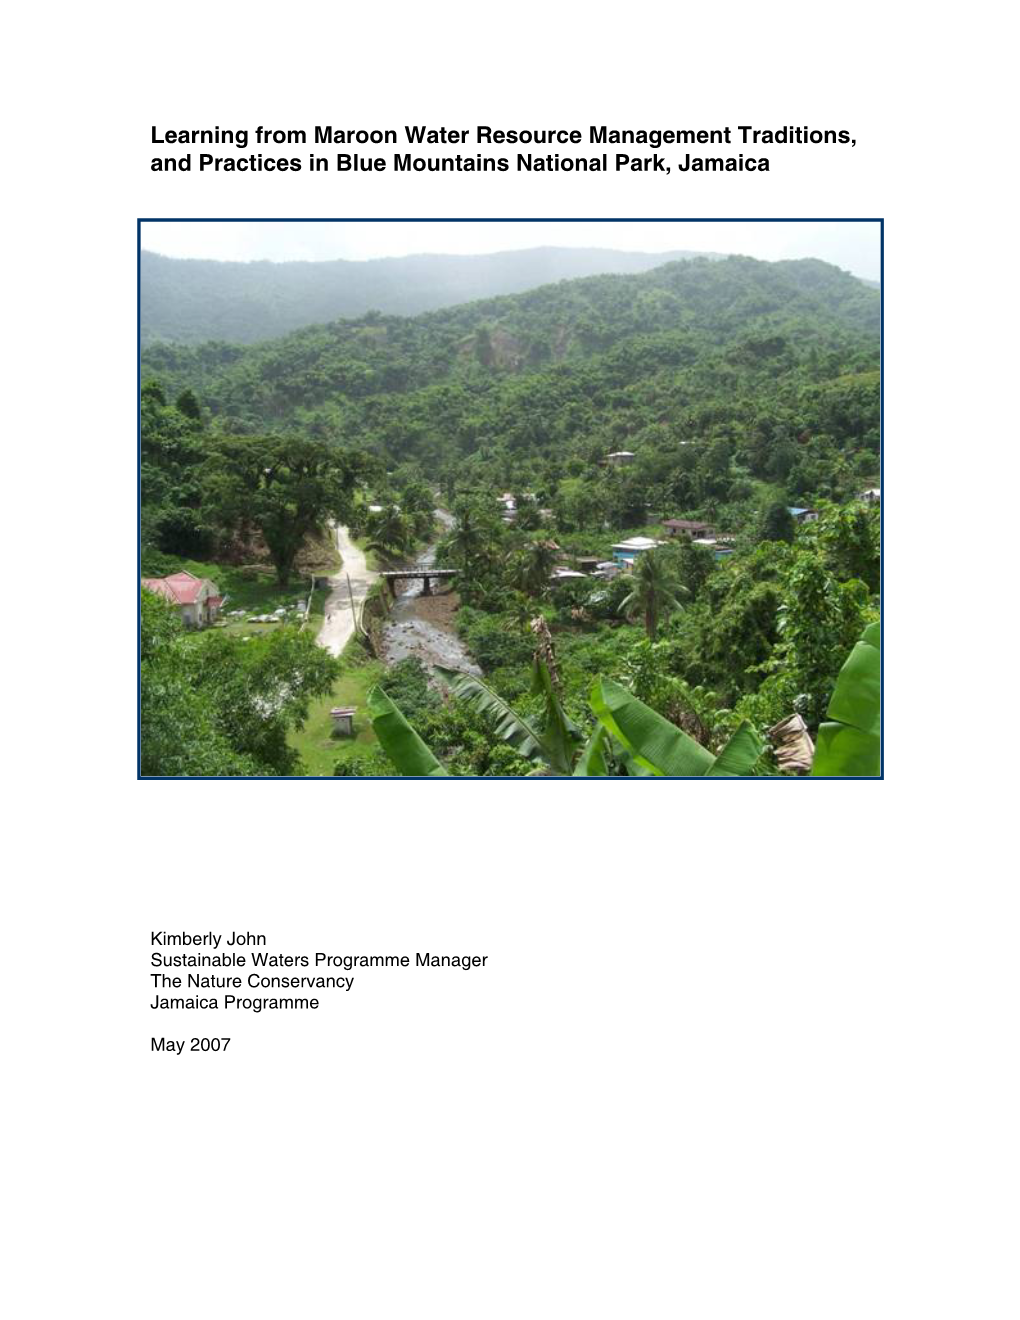 Learning from Maroon Water Resource Management Traditions, and Practices in Blue Mountains National Park, Jamaica